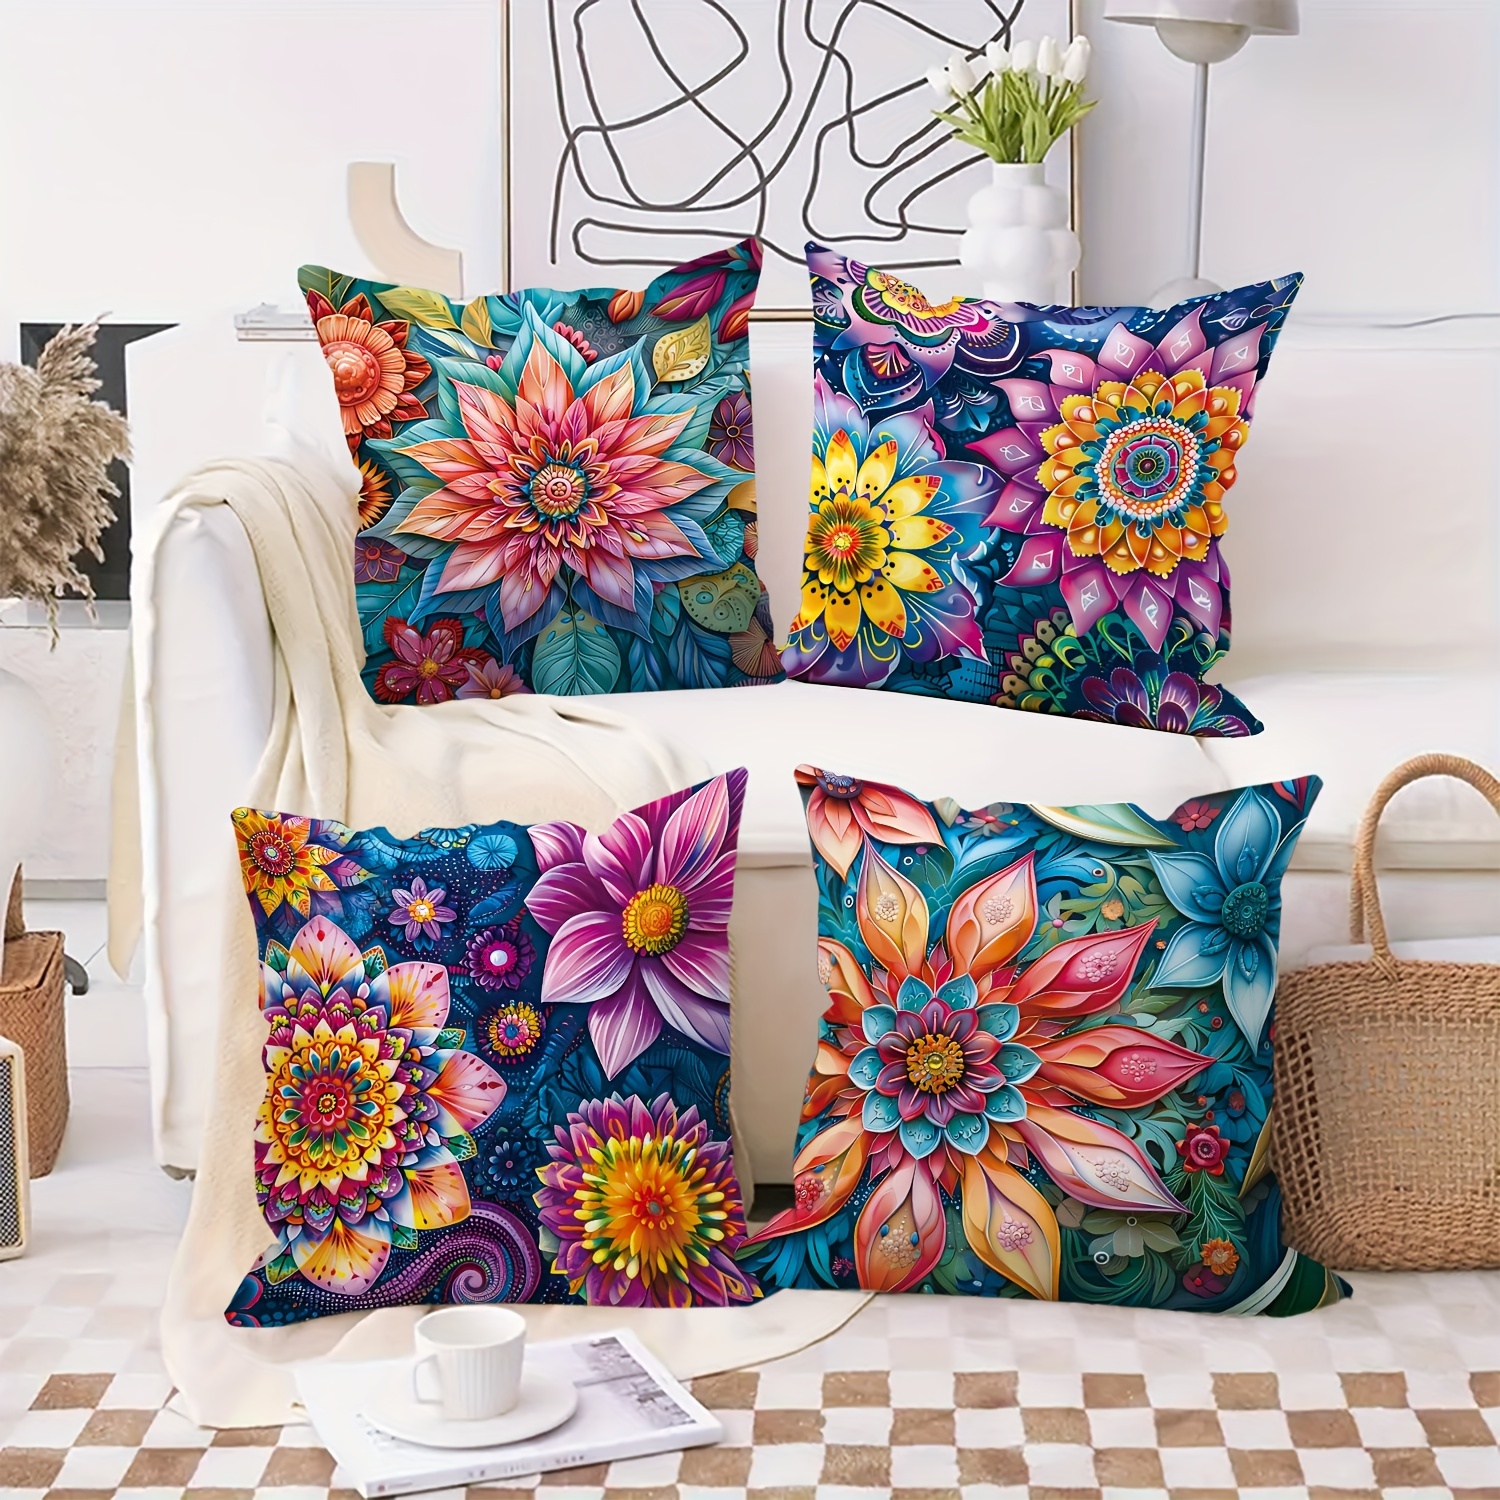 

Bohemian Style Floral Throw Pillow Covers Set Of 4, Machine Washable, Decorative Polyester Pillowcases With Zipper Closure For Sofa And Bedroom - 18x18 Inches